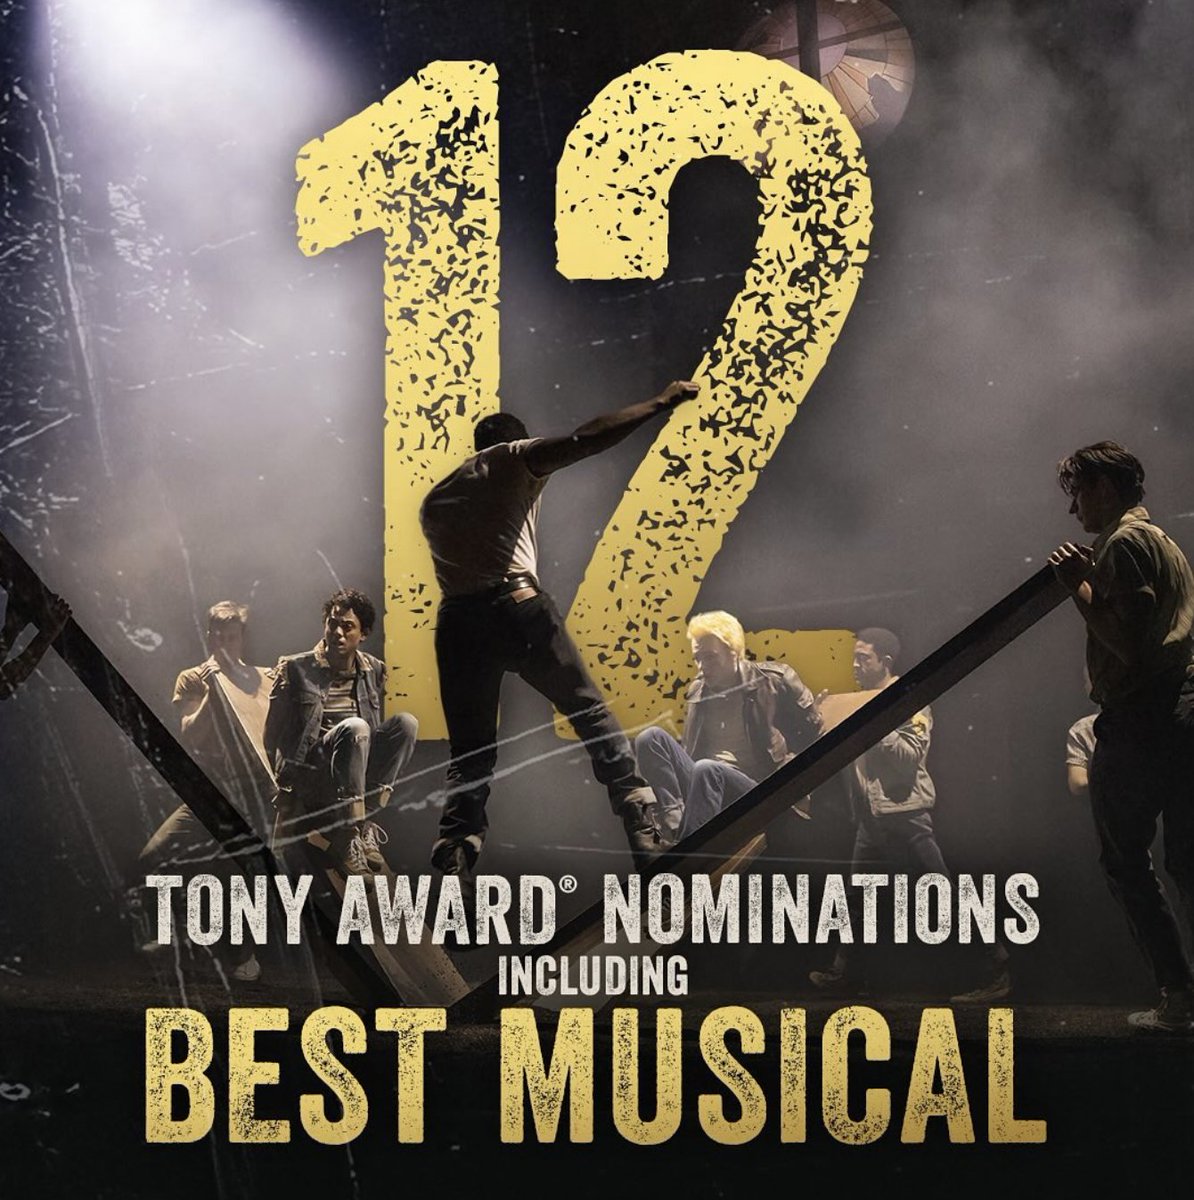 Congratulations to The Outsiders Musical on receiving a stunning 12 Tony Award nominations! Well deserved. Stay Gold, Tulsa!